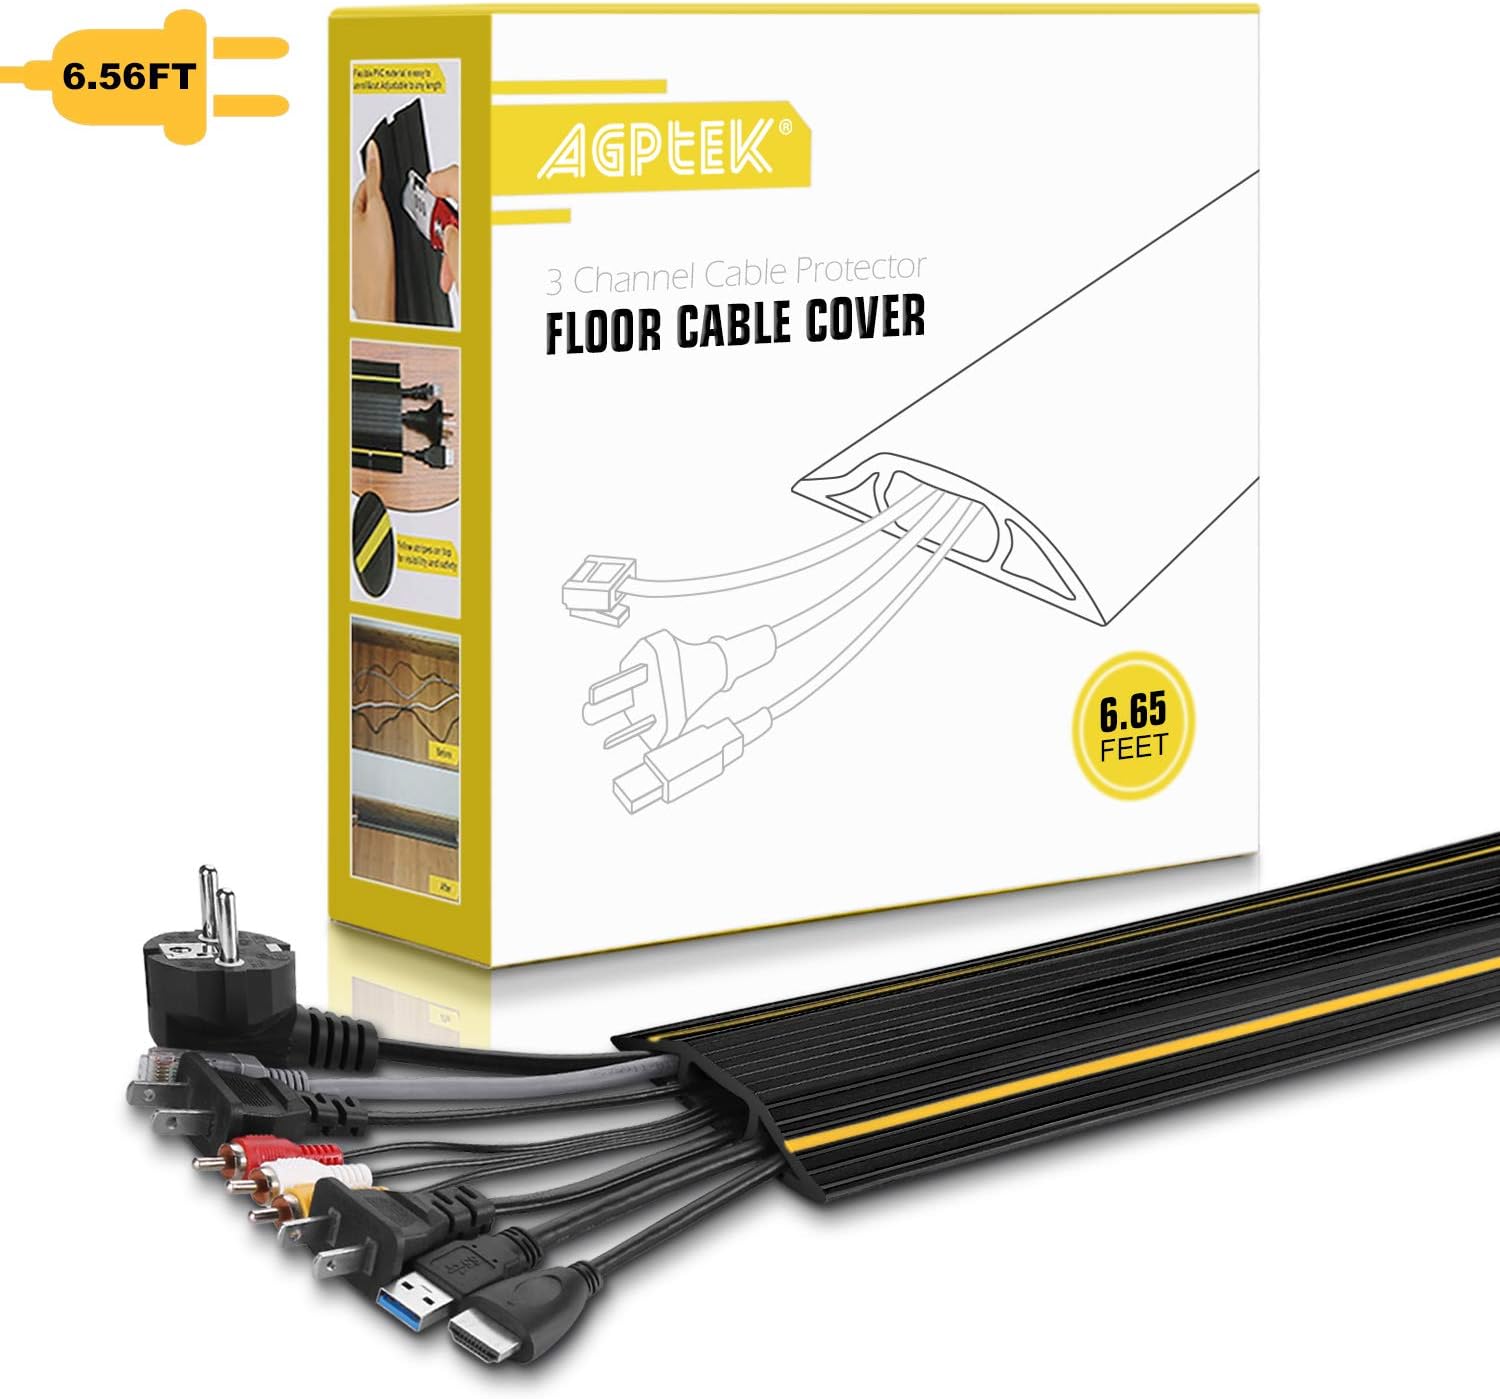 AGPtek Floor Cable Cover, 6.5 Ft Floor Cord Protector 3 Channels Contains Cords, Cables and Wires, Perfect for Office, Home, Workshop,